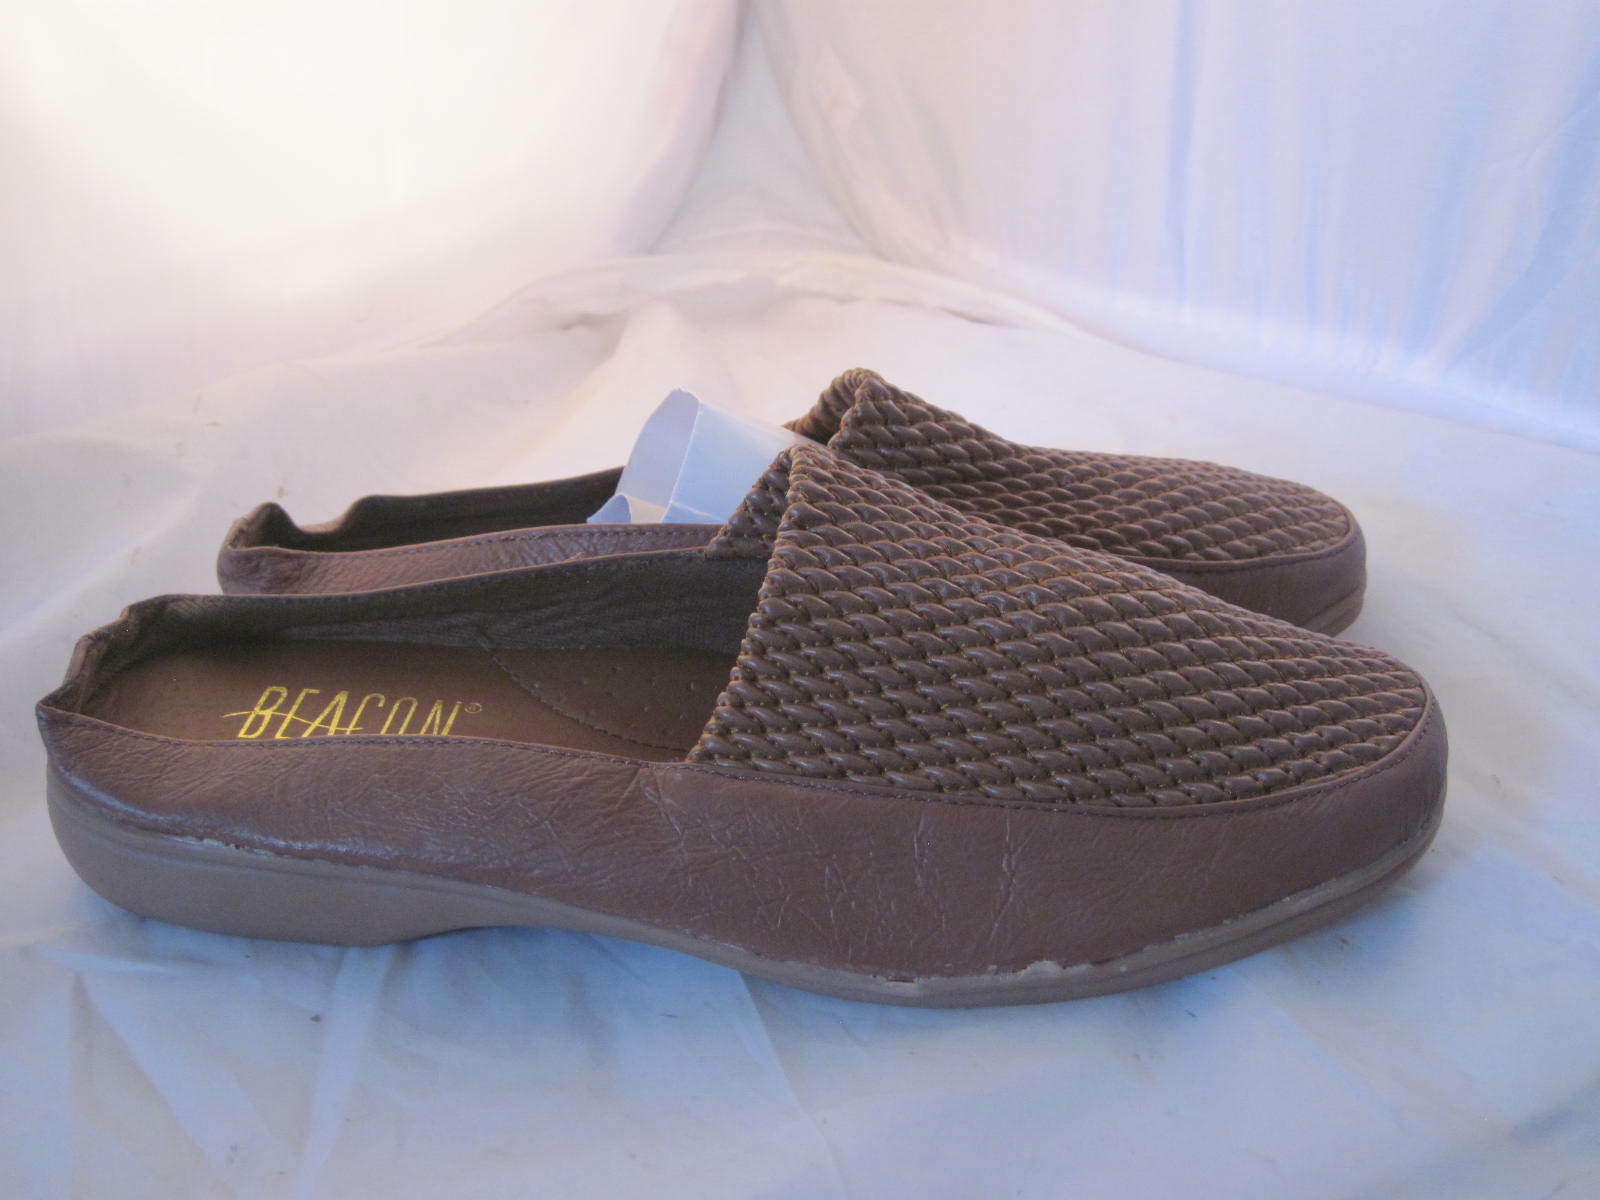 Beacon Stretch N Form Slip on Women's shoes Brown 8.5 M very ...